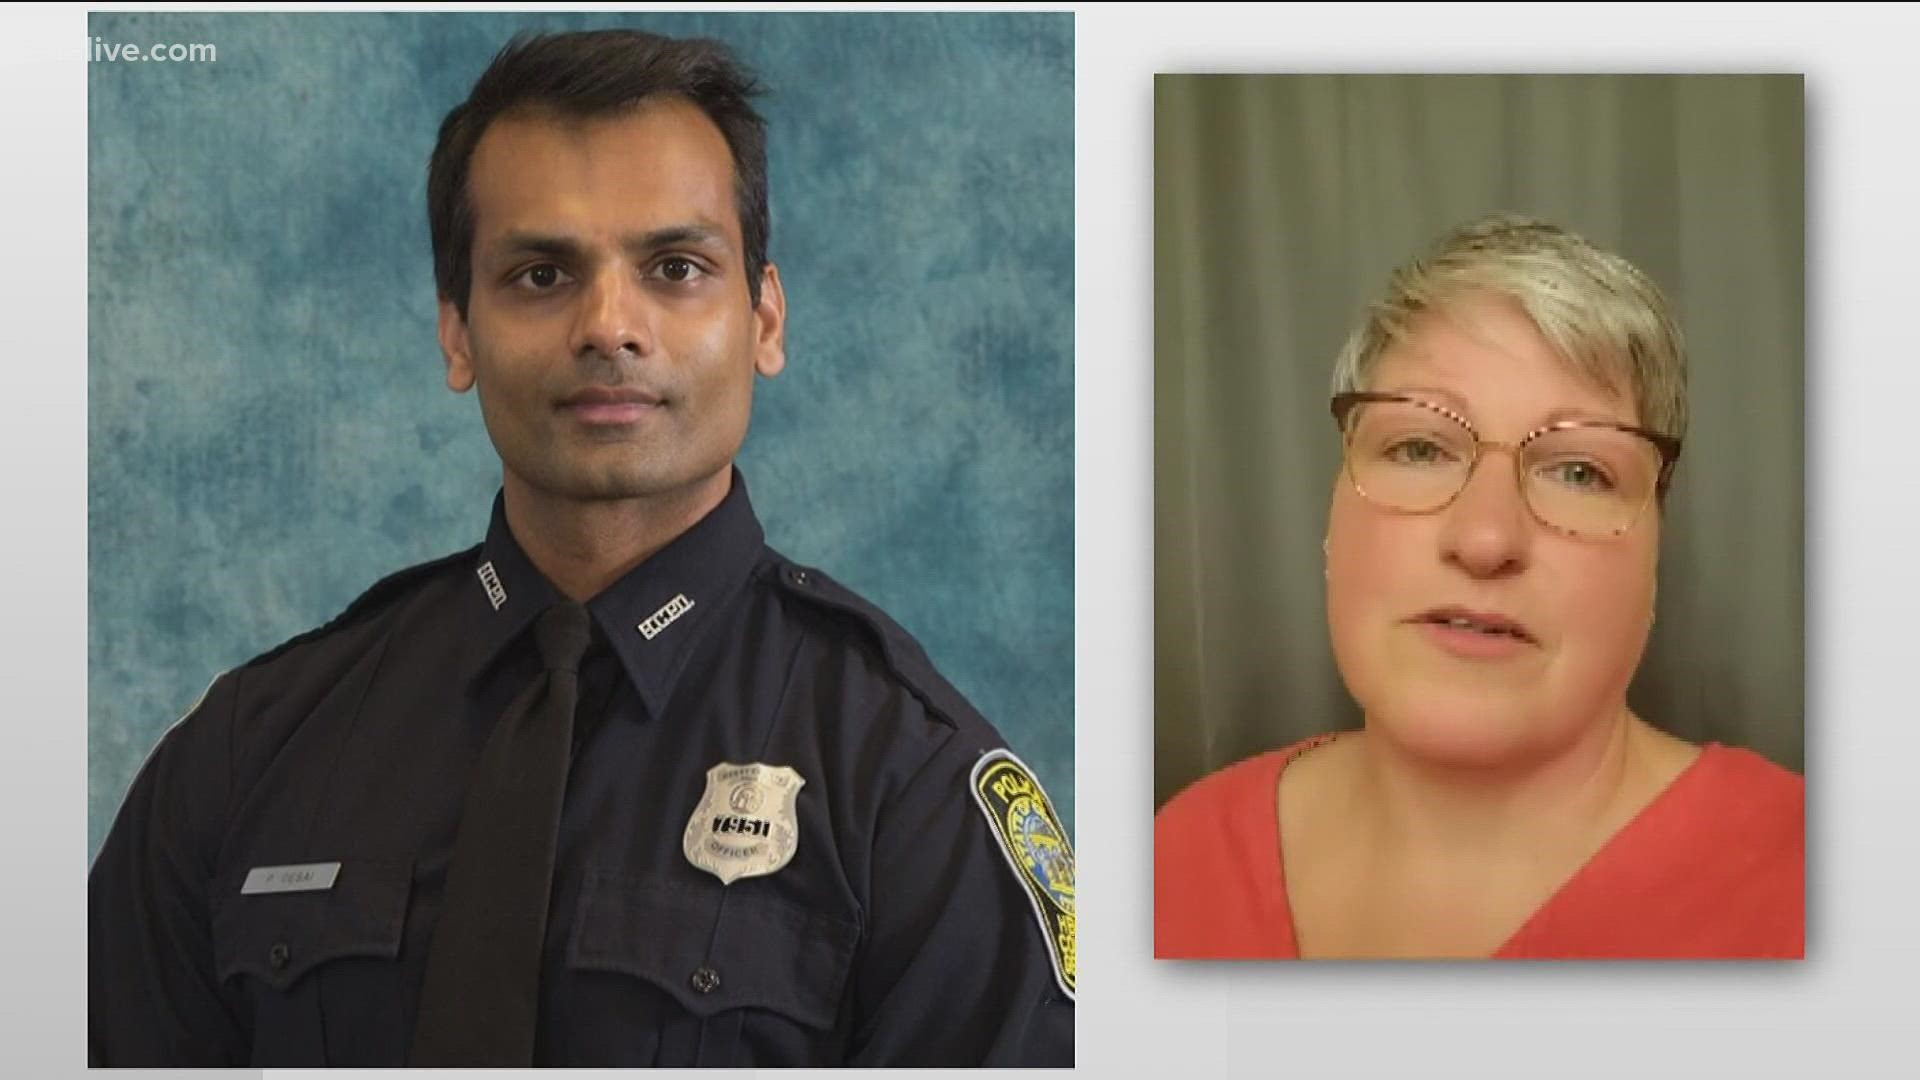 Jana Beasley tells 11Alive she requested a welfare check for her friend and Officer Paramhans Desai responded. His compassion helped her during that tough time.